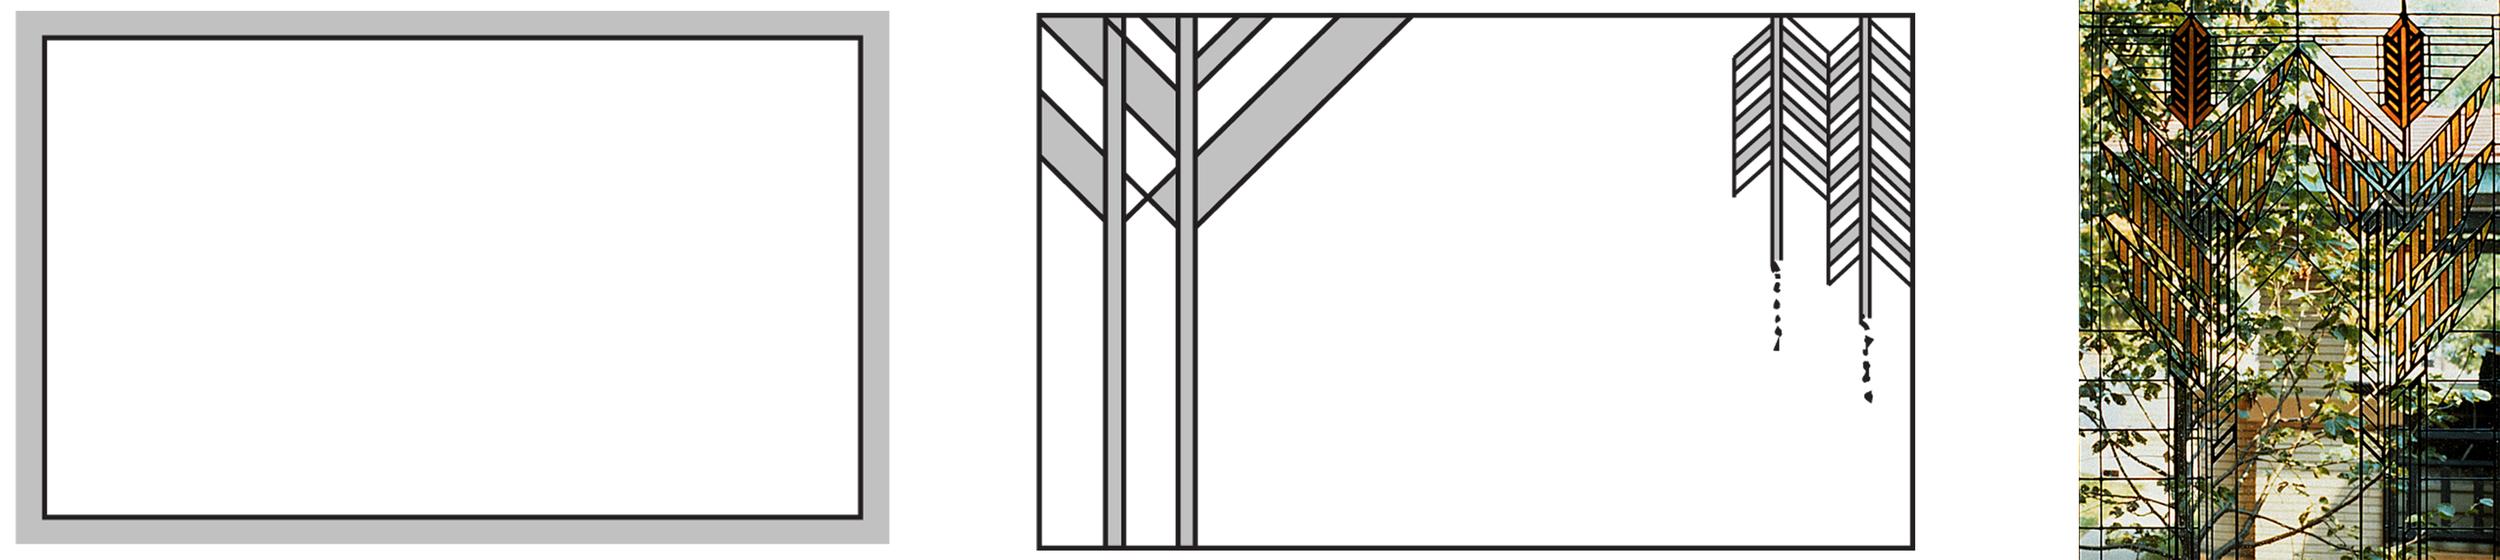 conventional window frame